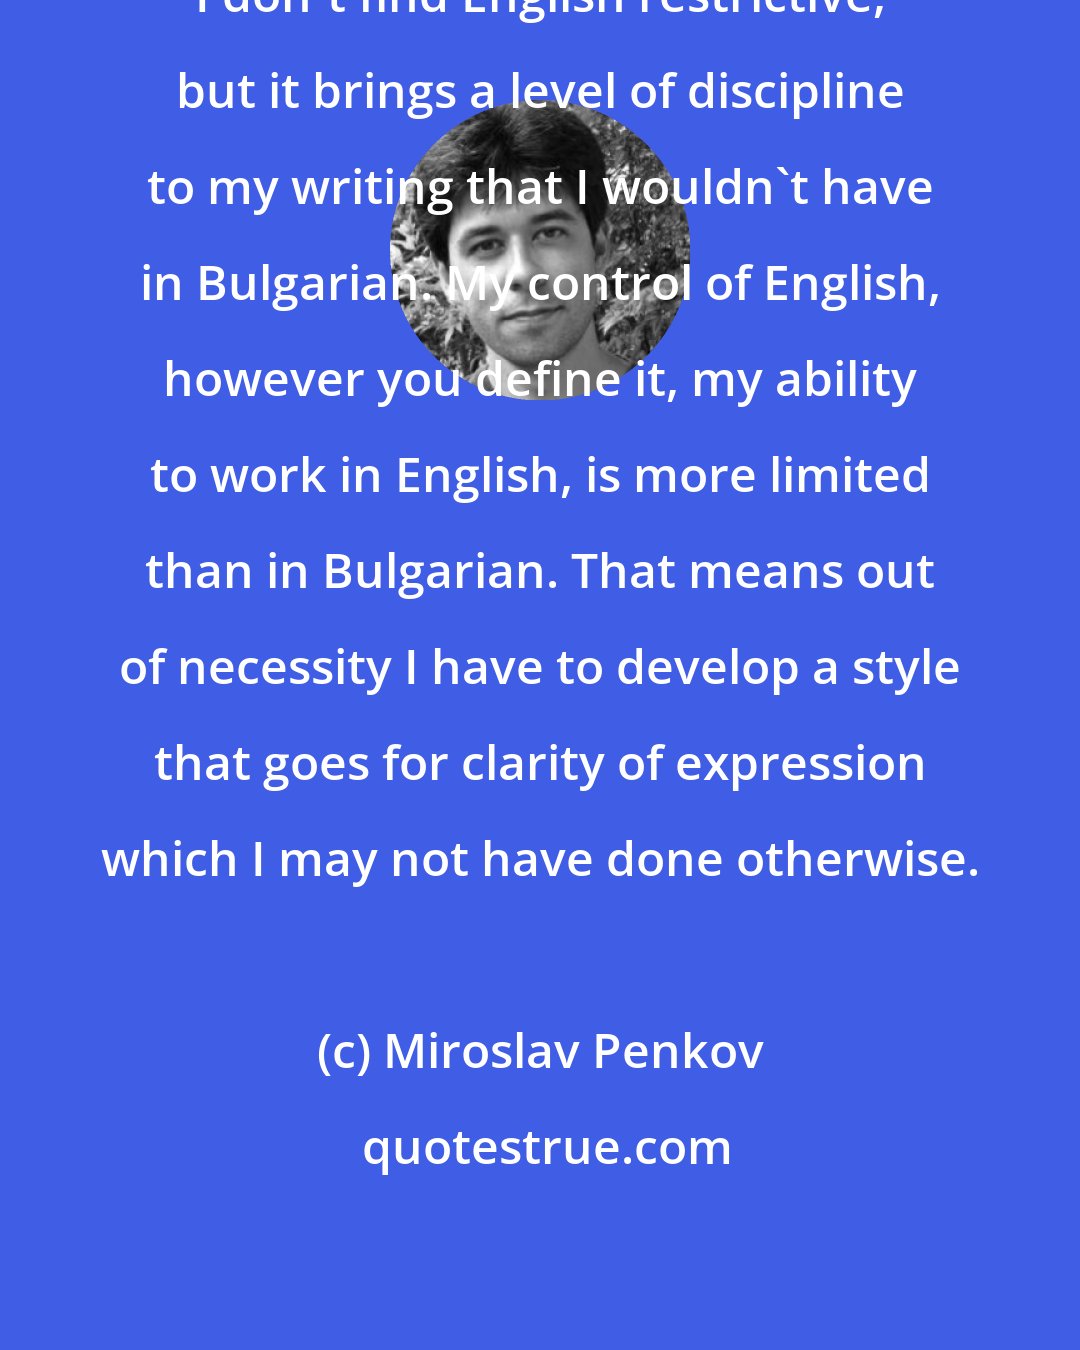 Miroslav Penkov: I don't find English restrictive, but it brings a level of discipline to my writing that I wouldn't have in Bulgarian. My control of English, however you define it, my ability to work in English, is more limited than in Bulgarian. That means out of necessity I have to develop a style that goes for clarity of expression which I may not have done otherwise.